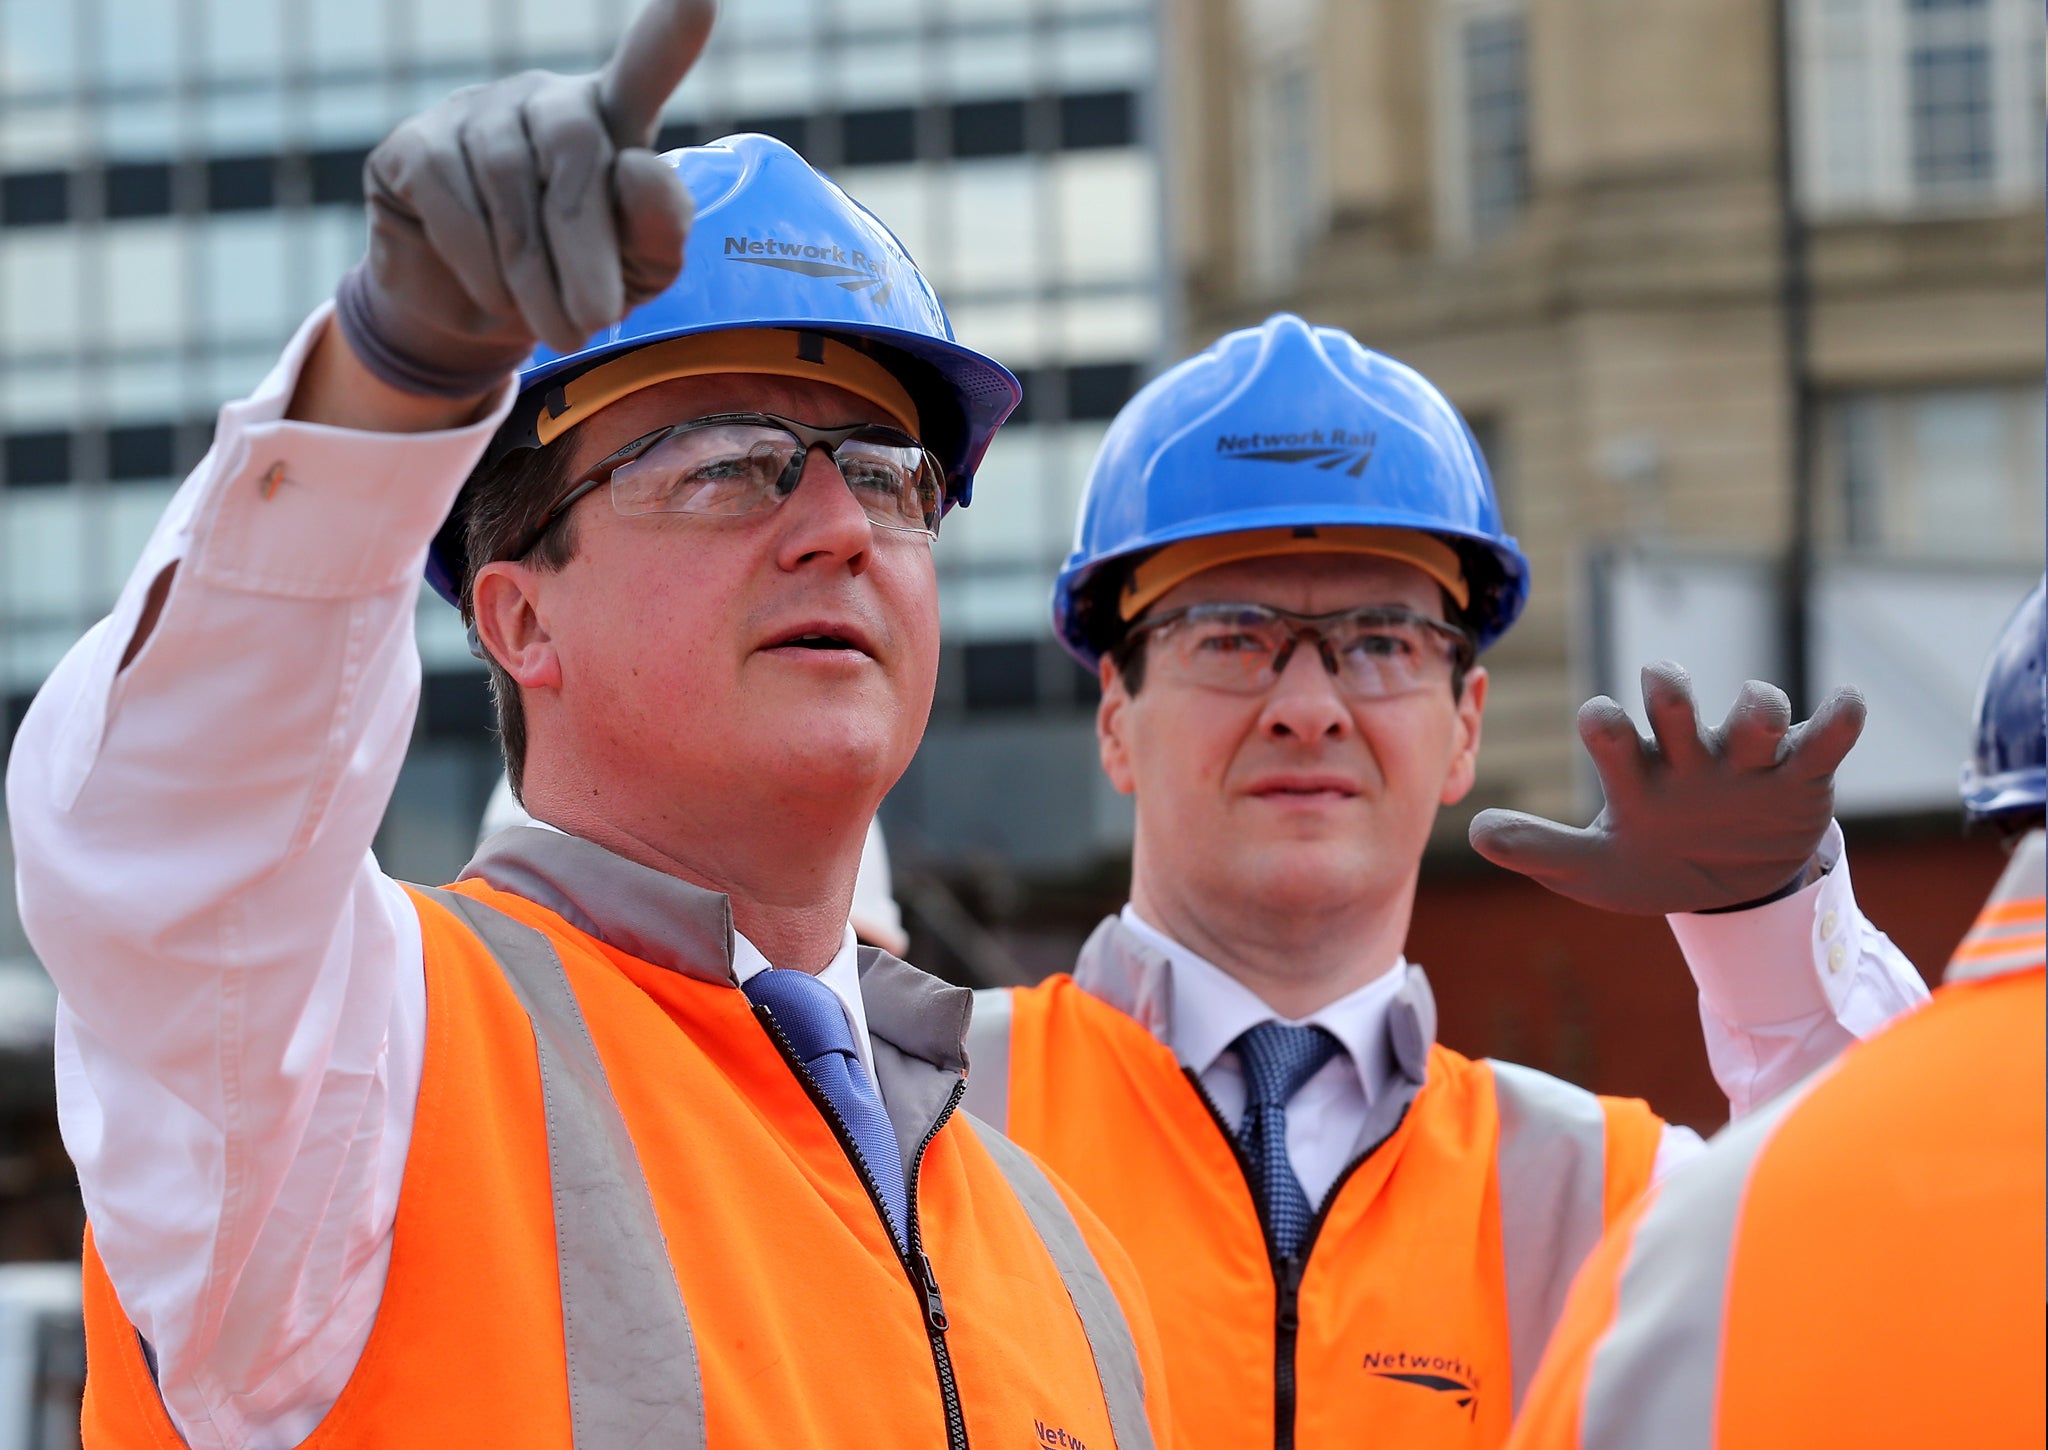 David Cameron and George Osborne are against the move to scrap HS2